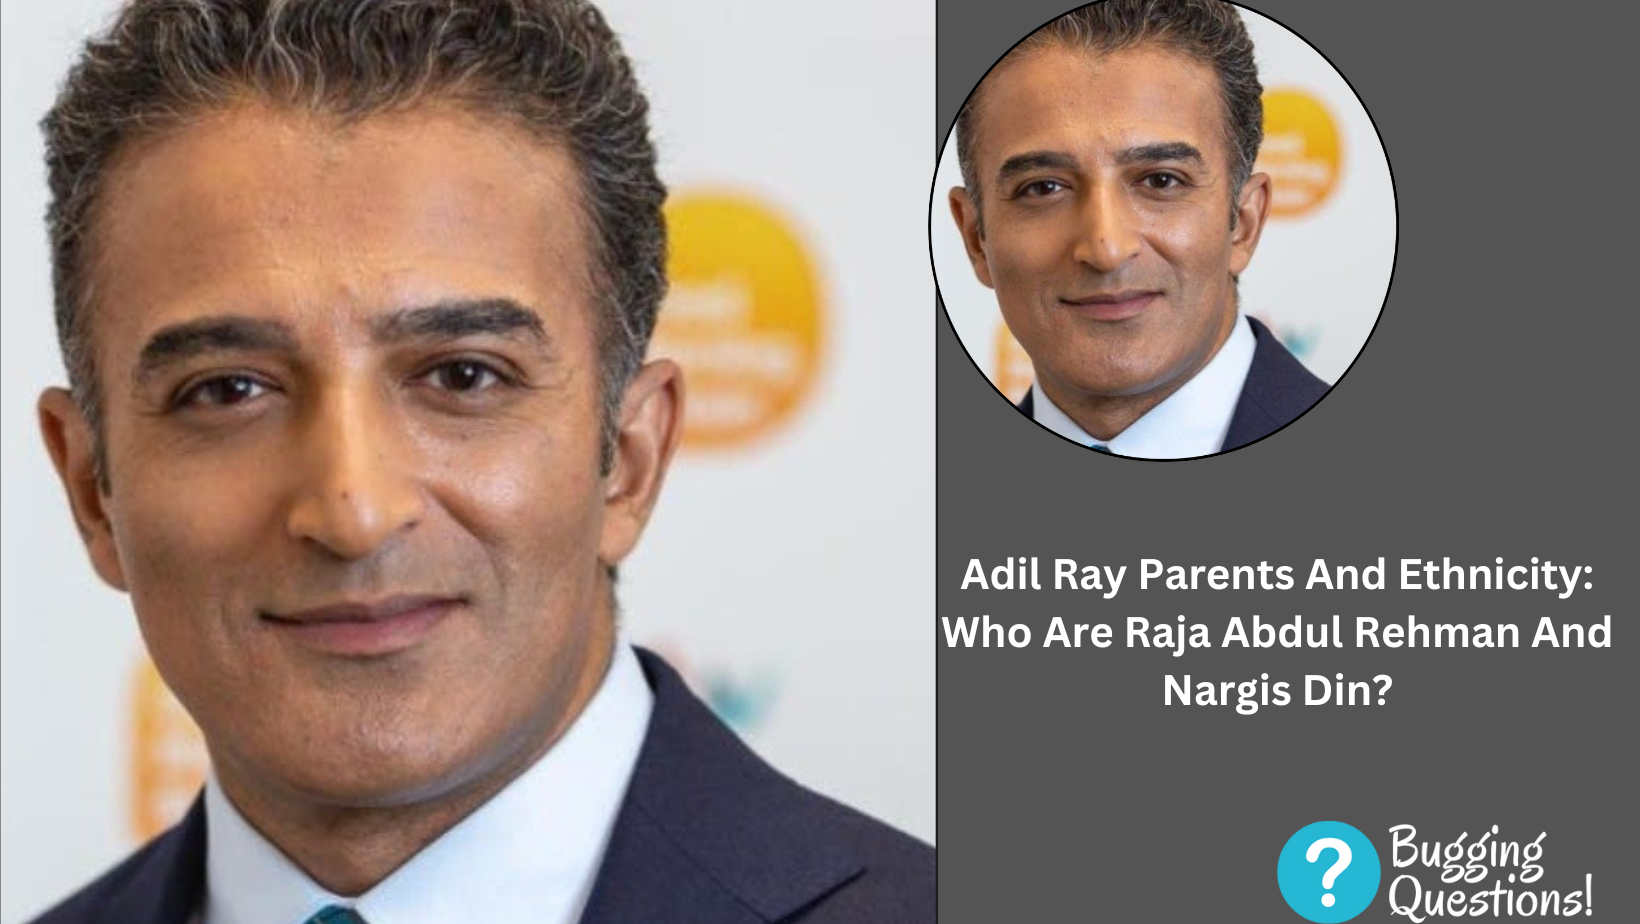 Adil Ray Parents And Ethnicity